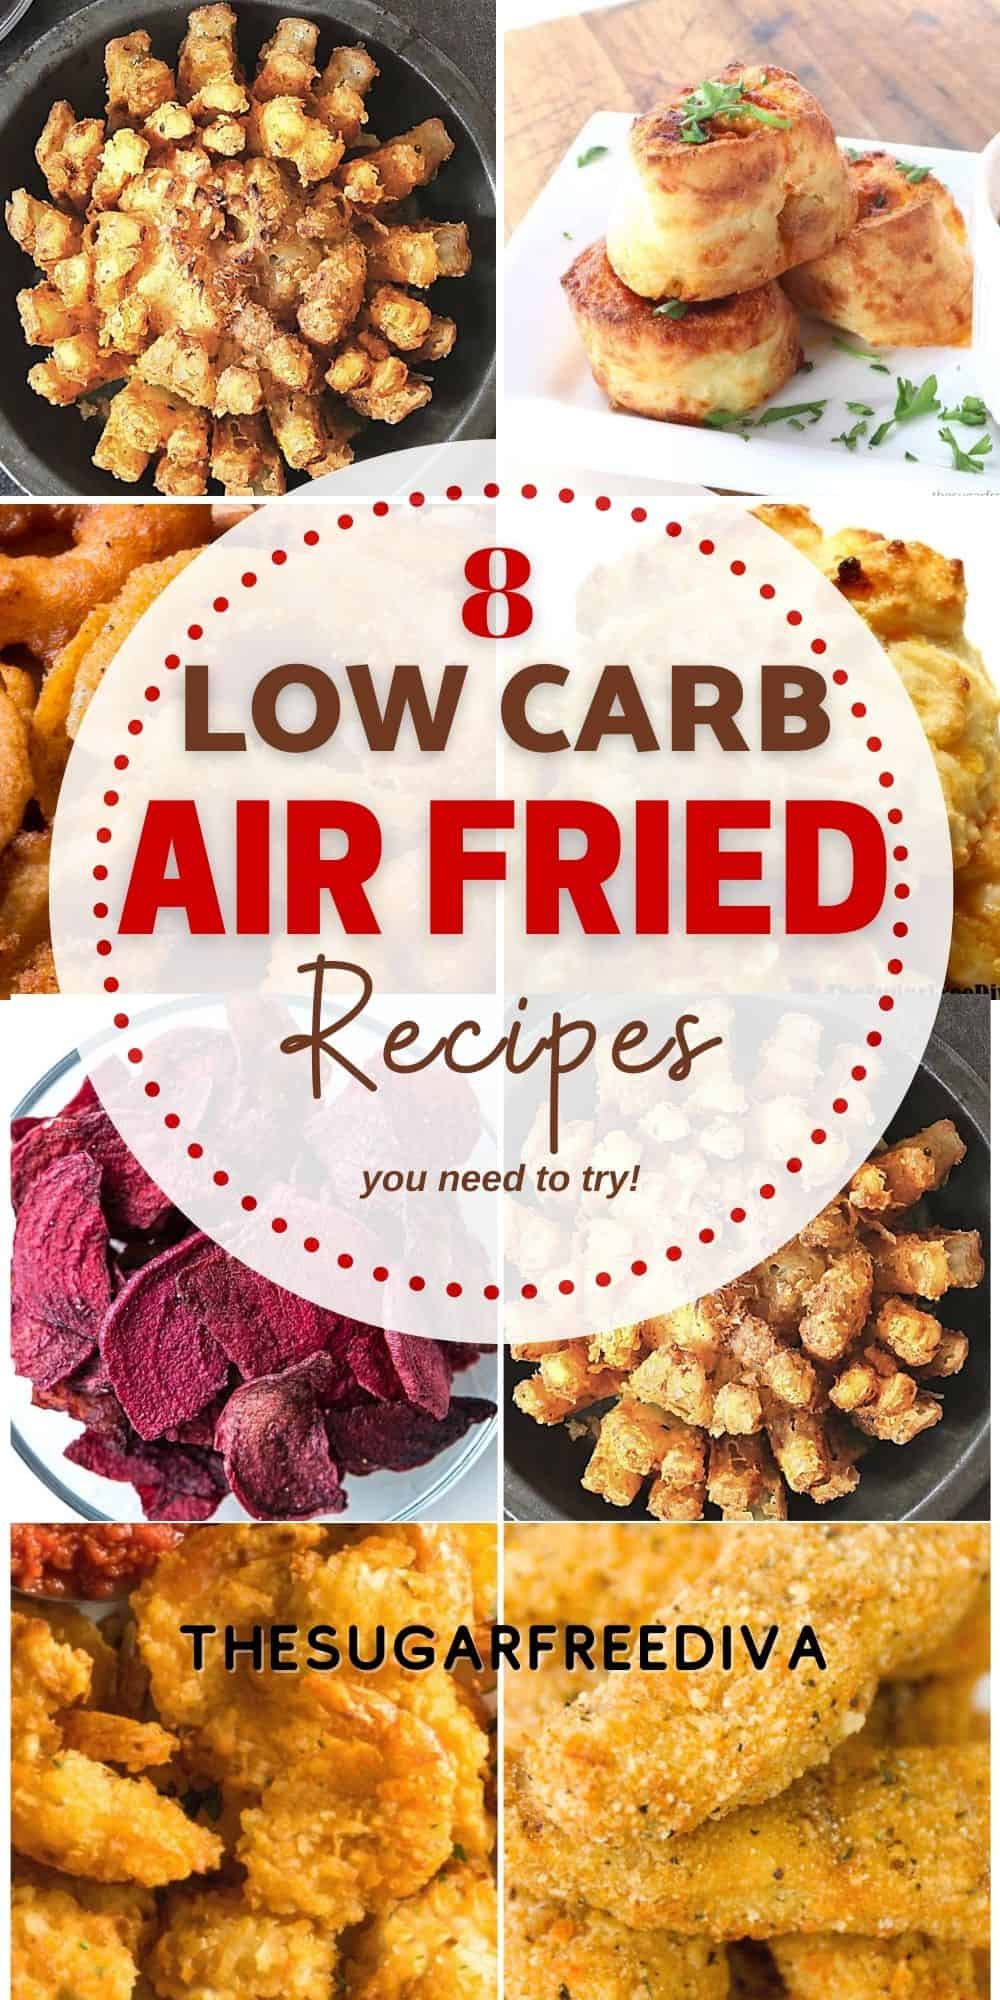 8 Low Carb Air Fried Recipes You Need To Try